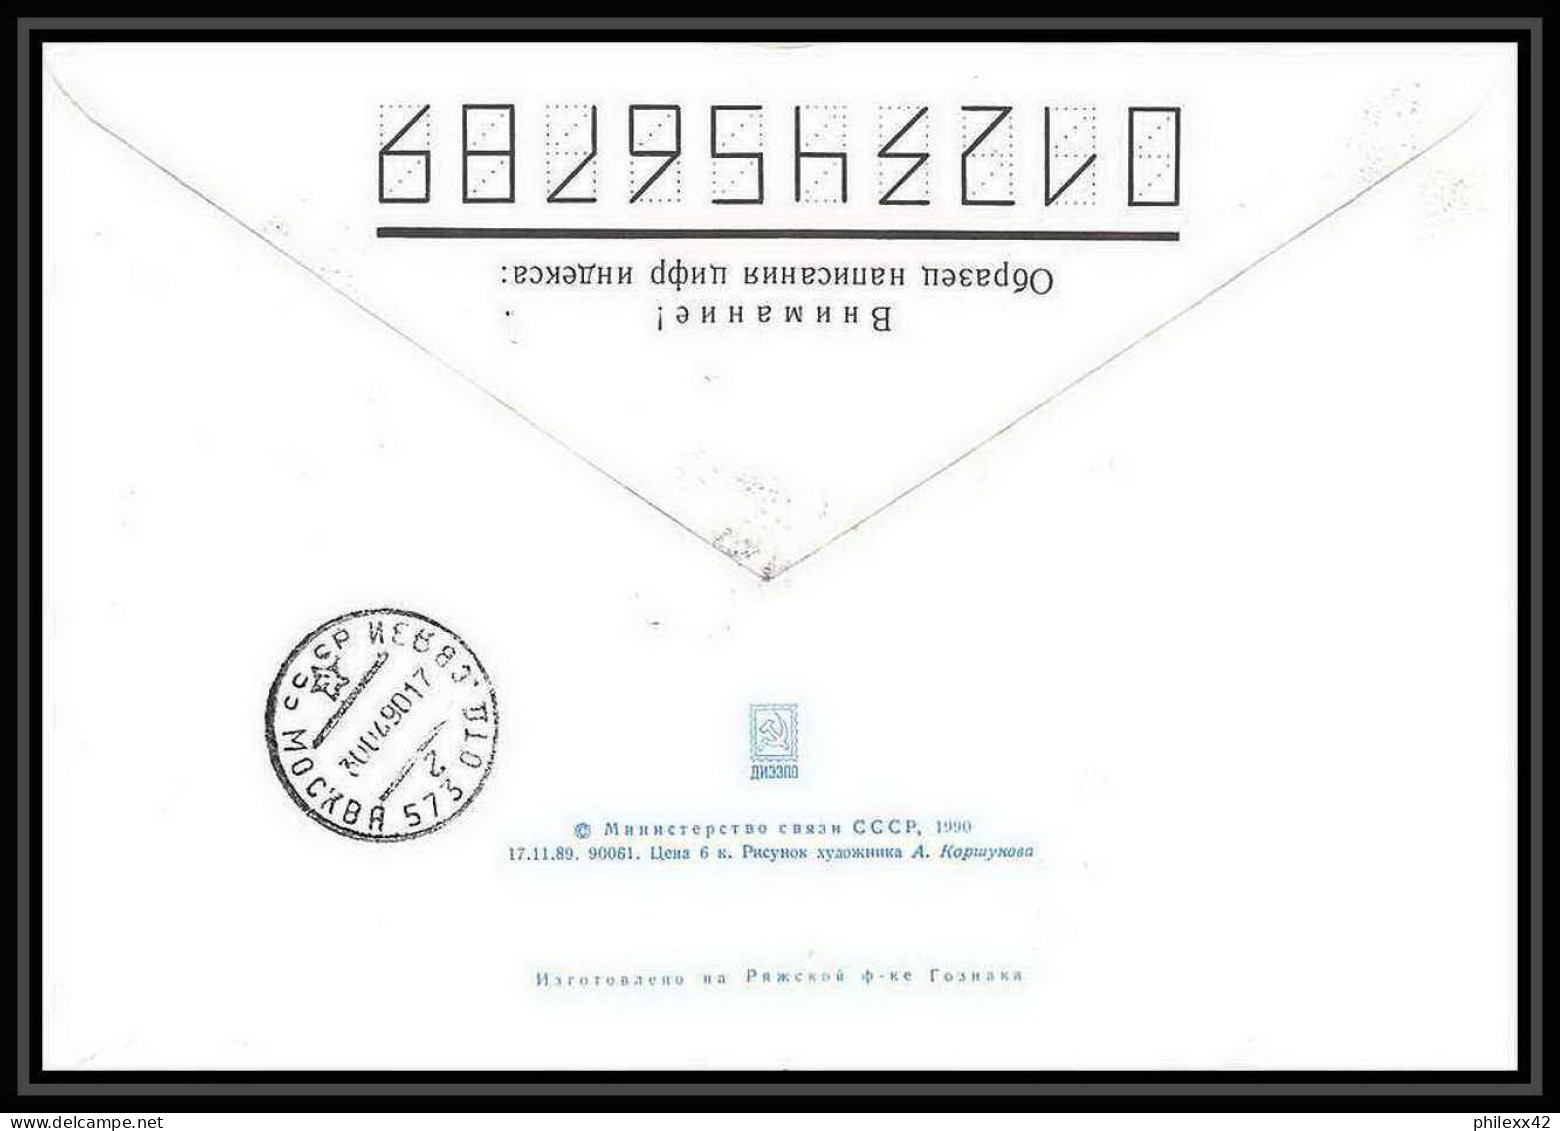 10062/ Espace (space) Entier Postal (Stamped Stationery) 12/4/1990 DAY OF COSMONAUTIC (urss USSR) - UdSSR